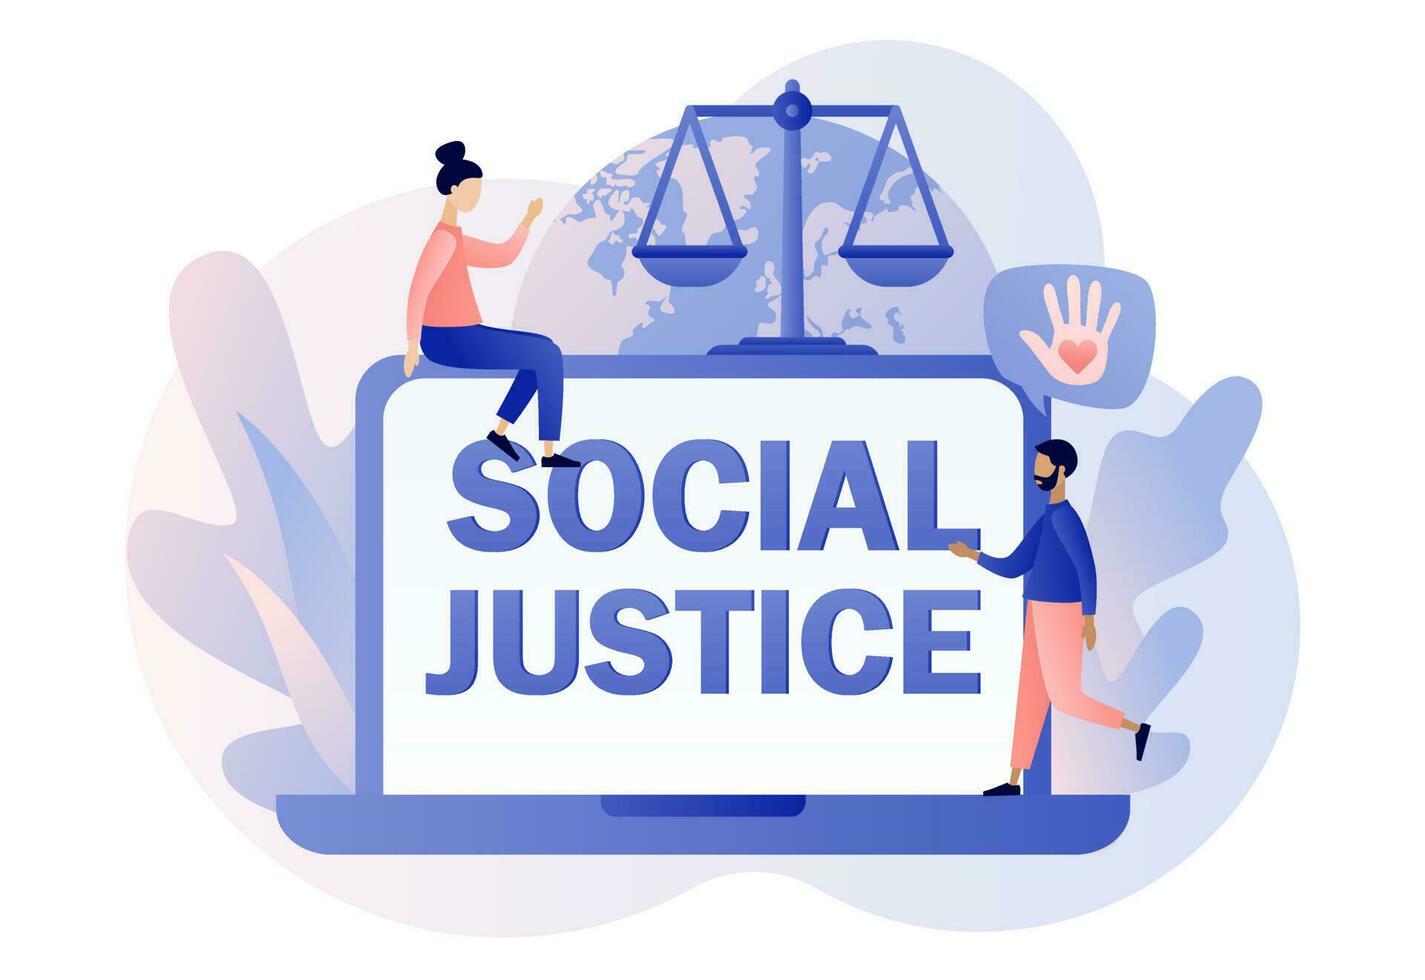 Social justice - text on laptop screen. Human rights concept. Scales as symbol of equality, freedom and love. Tiny people for tolerance and respect.Modern flat cartoon style. Vector illustration